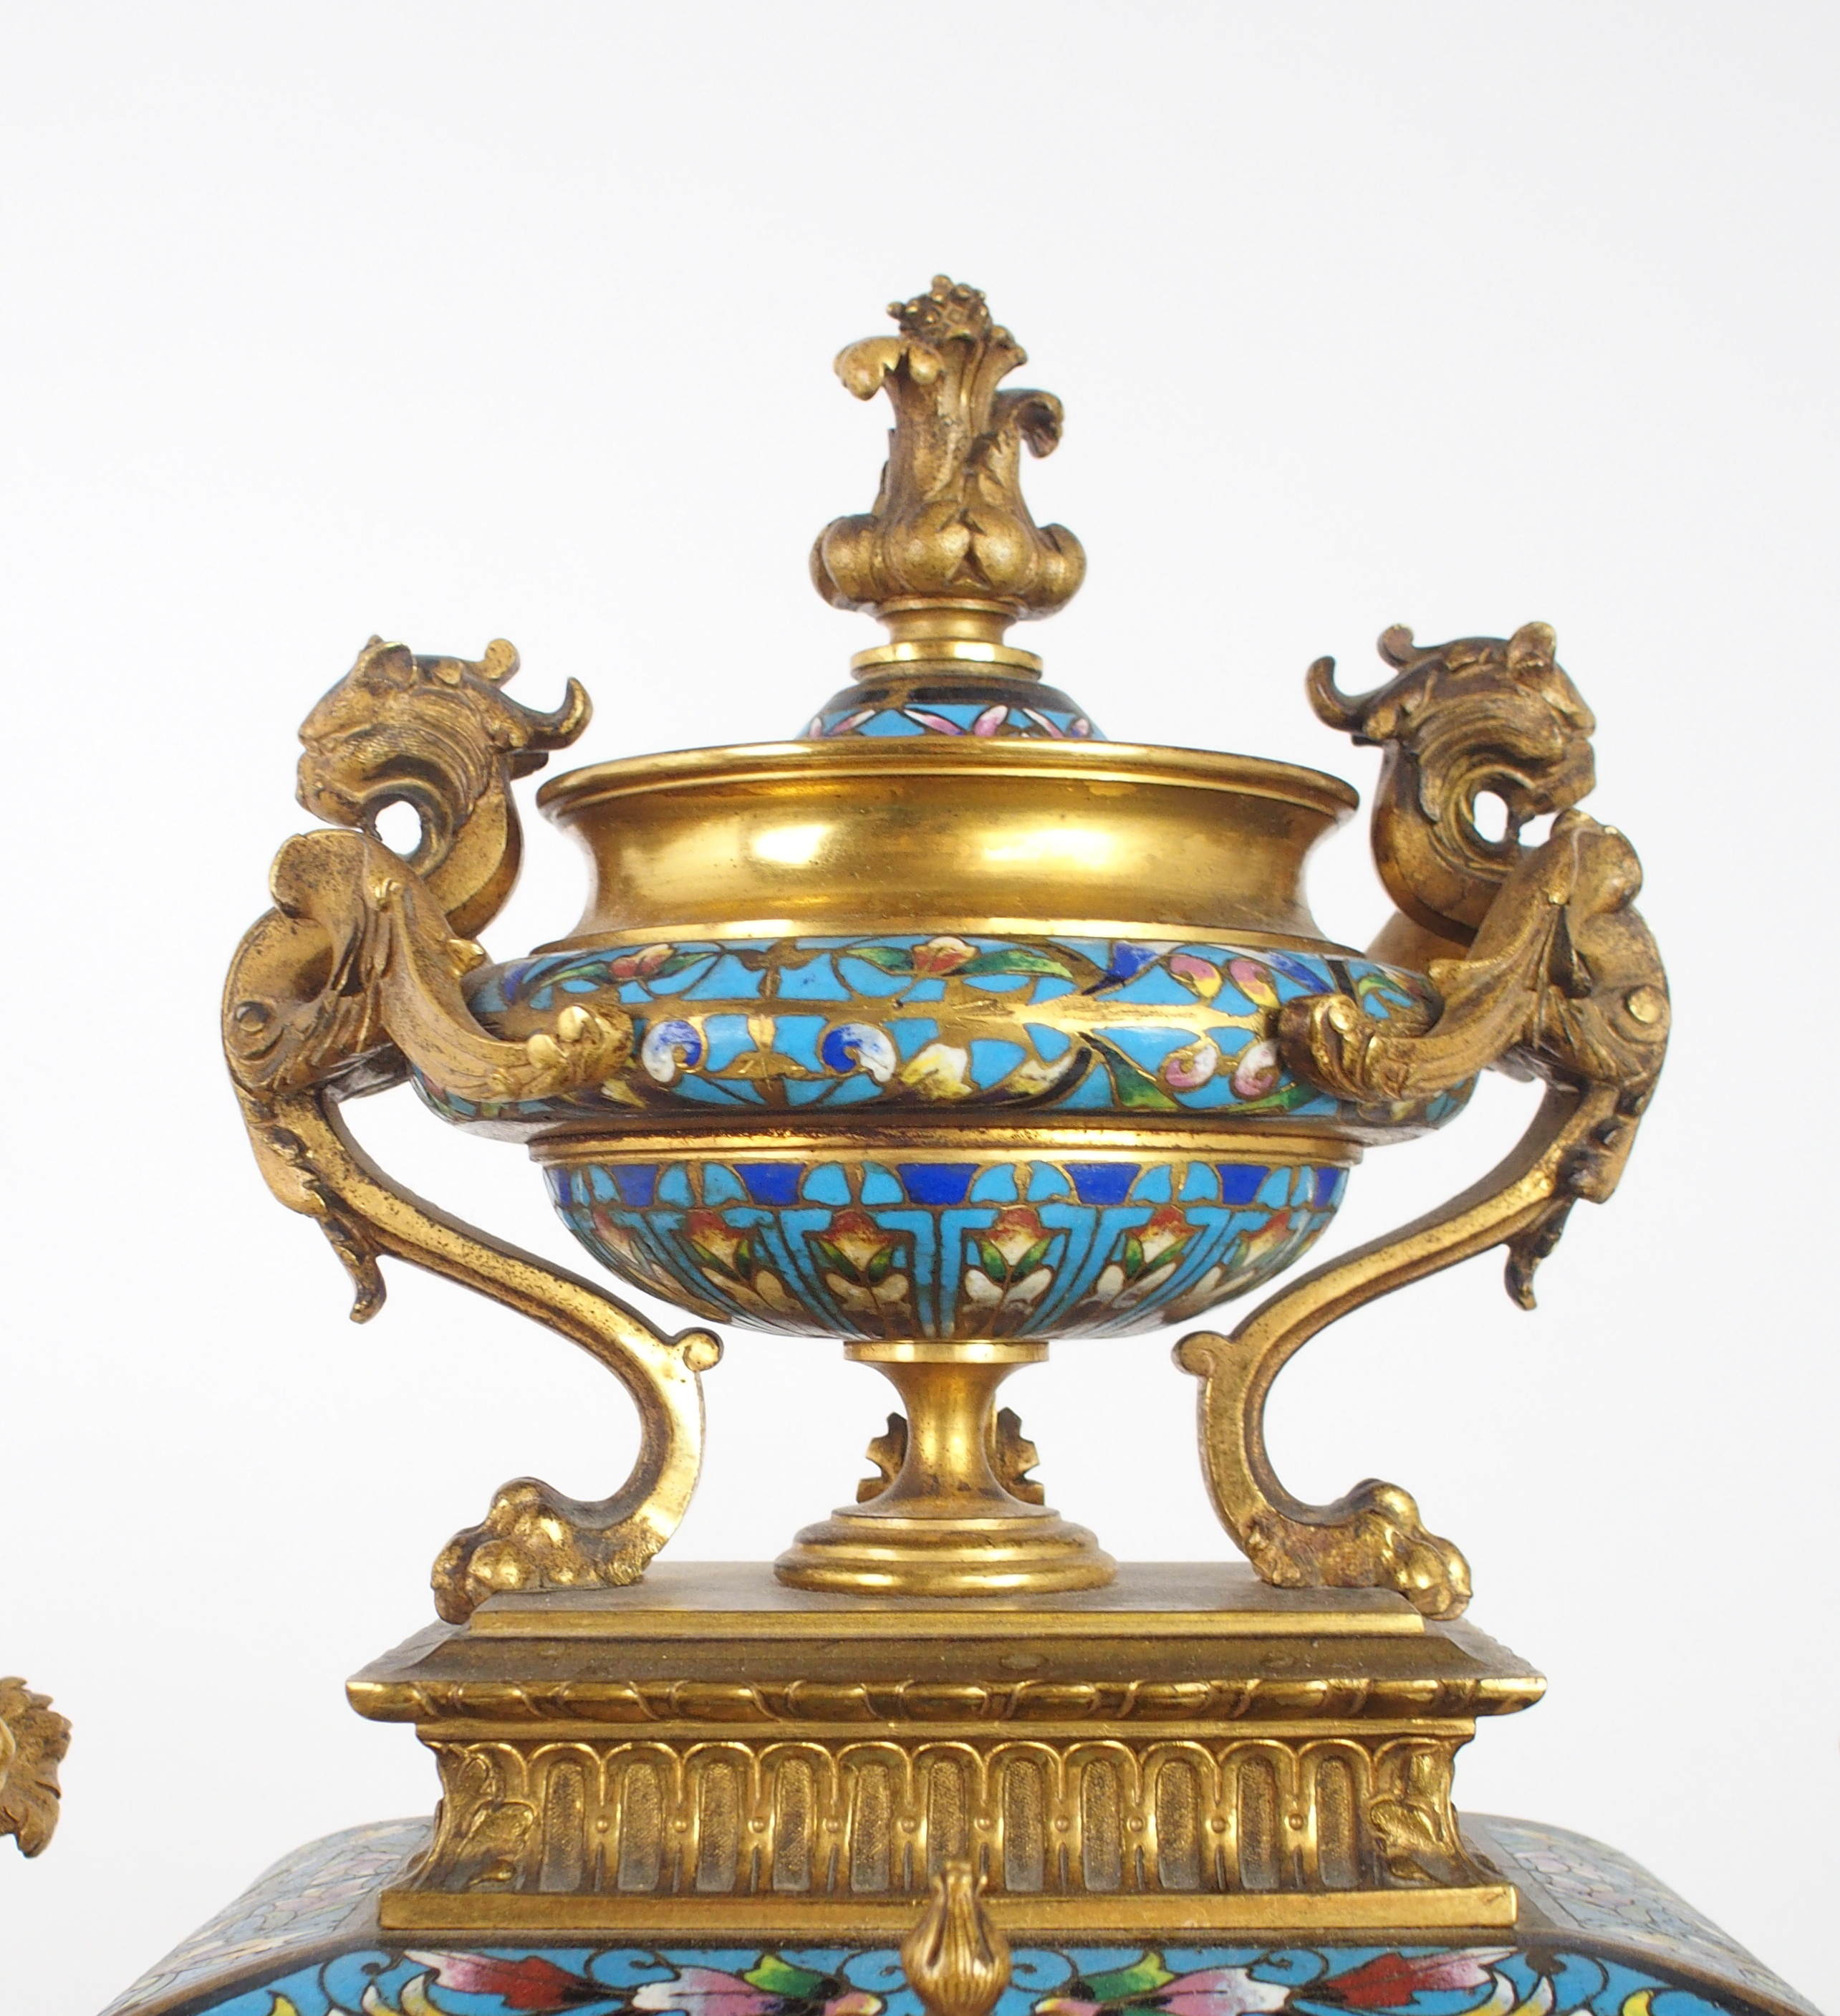 AN IMPRESSIVE 19TH CENTURY FRENCH CHAMPLEVE ENAMEL MANTLE CLOCK the urn mounted top with griffin han - Image 4 of 15